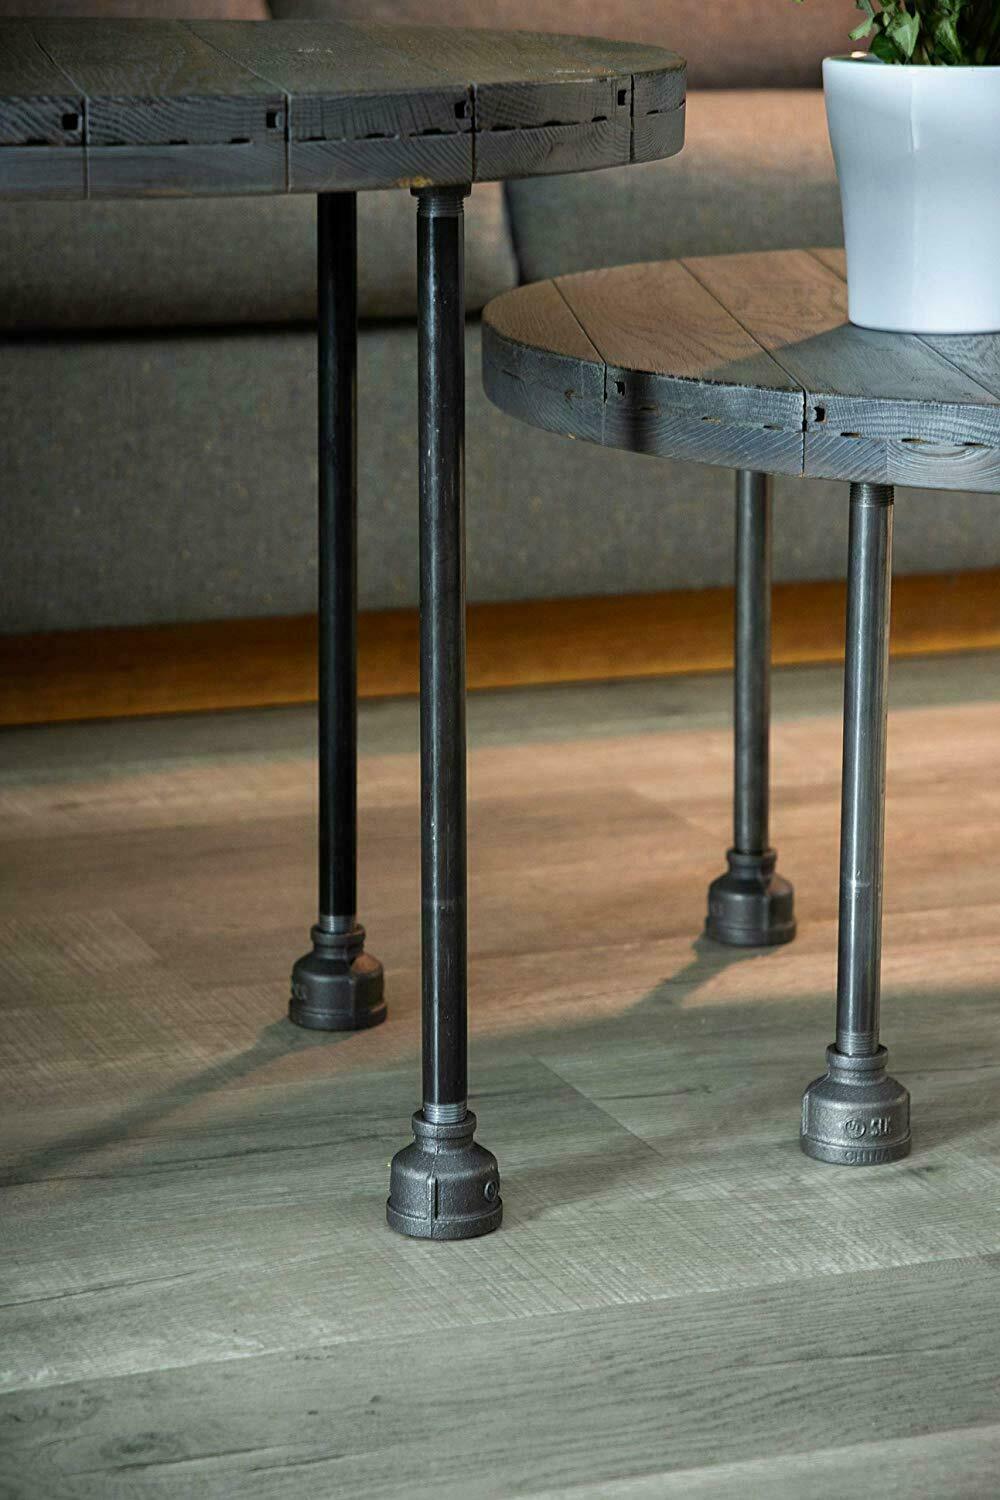 Newte Durable and Stylish: Table Legs DIY